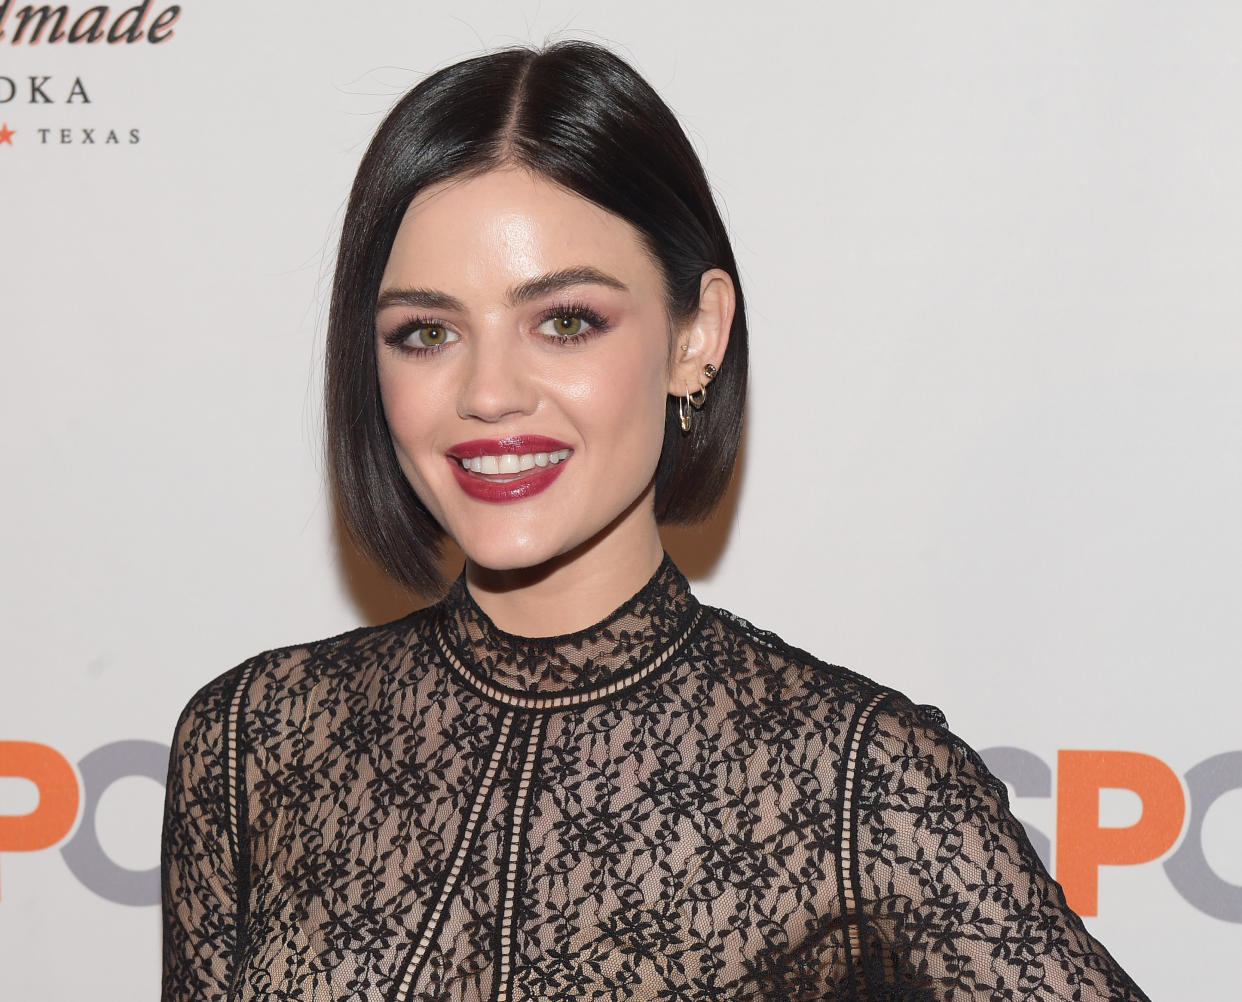 Lucy Hale used one of those insane bubble masks, and she looked like a beautiful alien